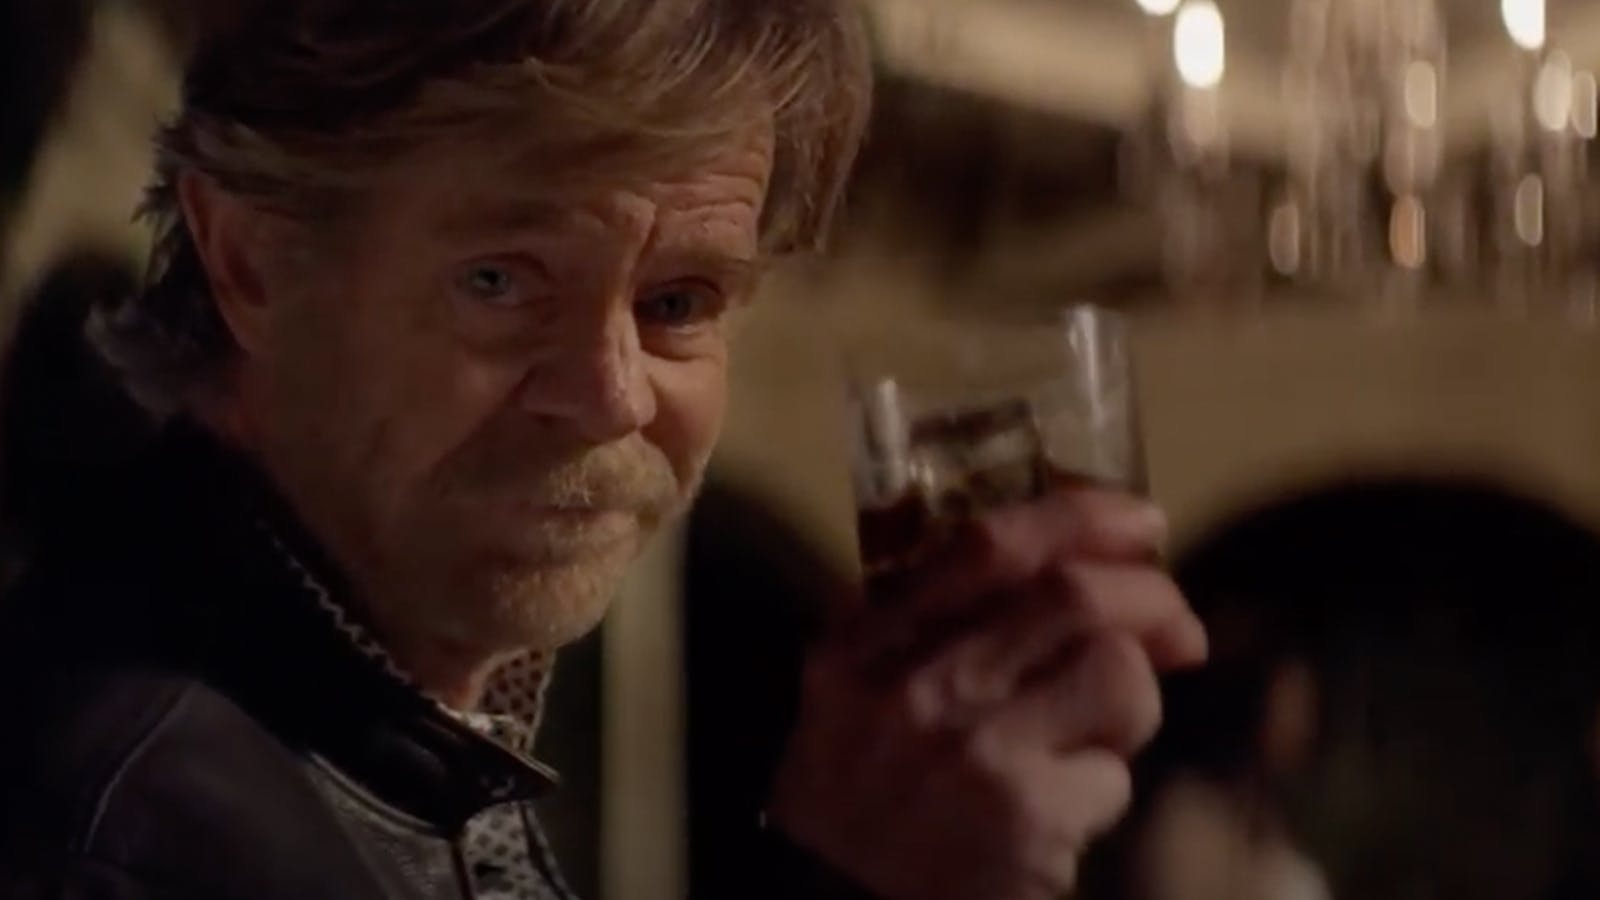 Actor William H. Macy looks at the camera and raises a glass of bourbon for the Woody Creek campaign.